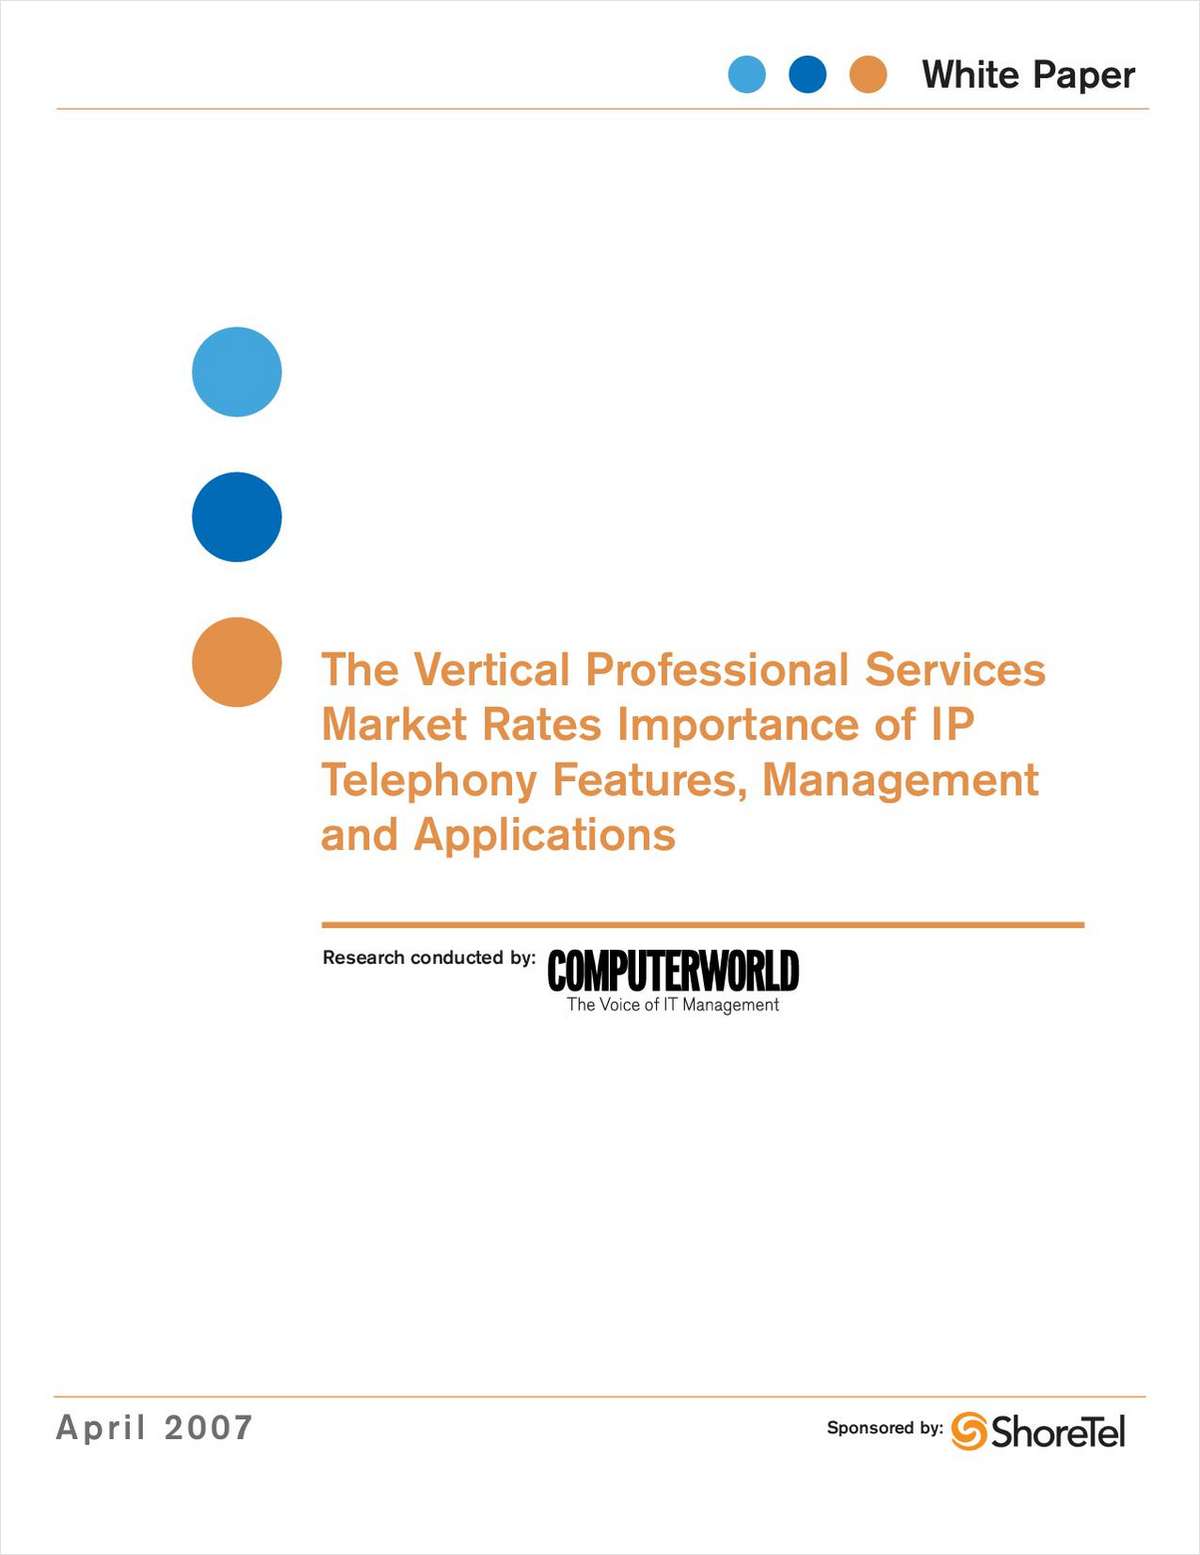 Vertical Professional Services Market Rates Importance of IP Telephony Features, Management and Applications